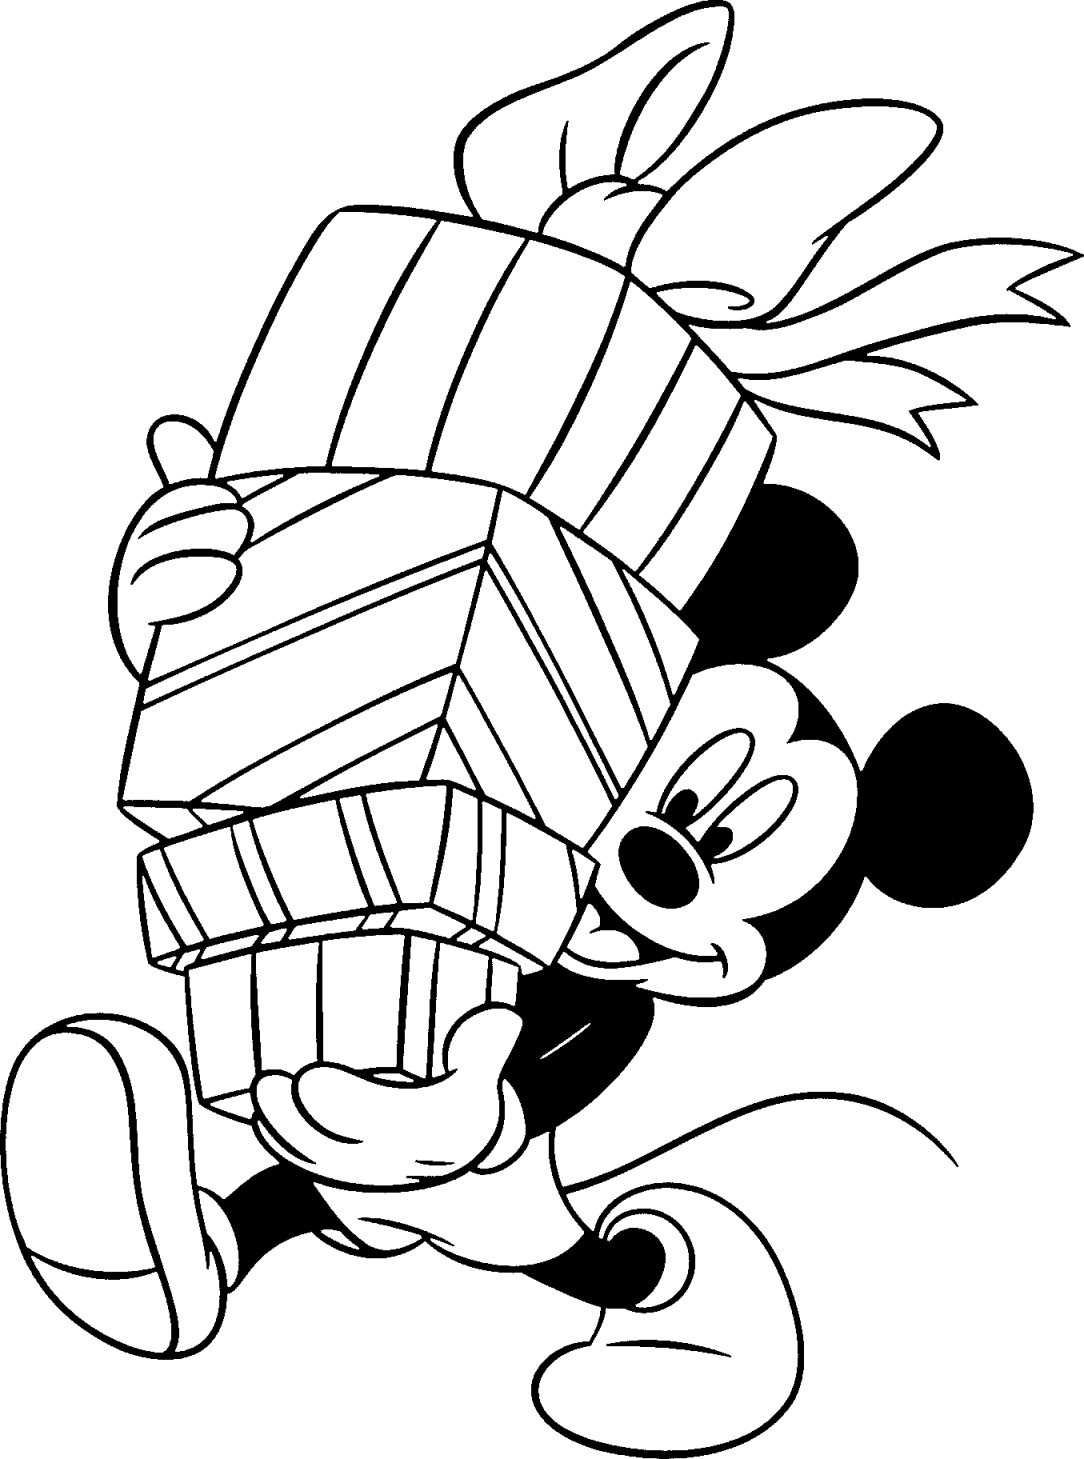 Printable Coloring Pages Christmas
 Free Disney Christmas Printable Coloring Pages for Kids